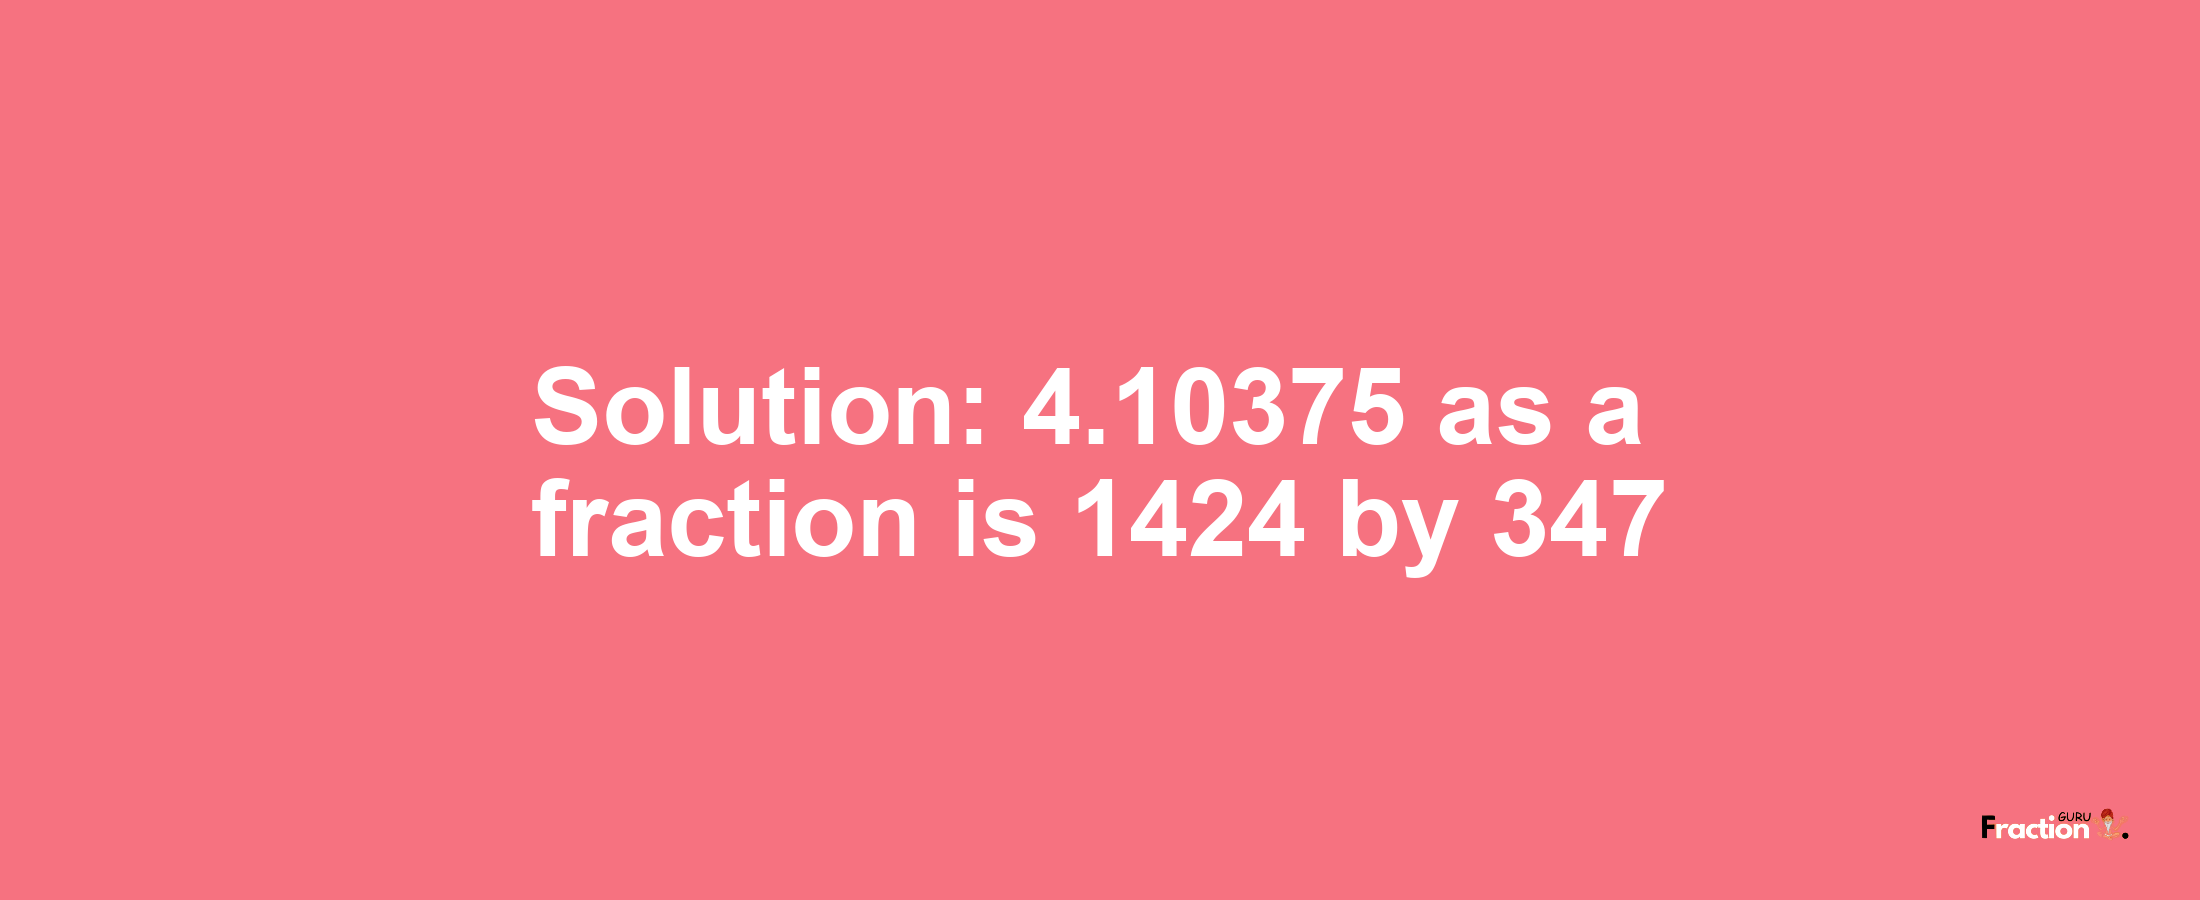 Solution:4.10375 as a fraction is 1424/347